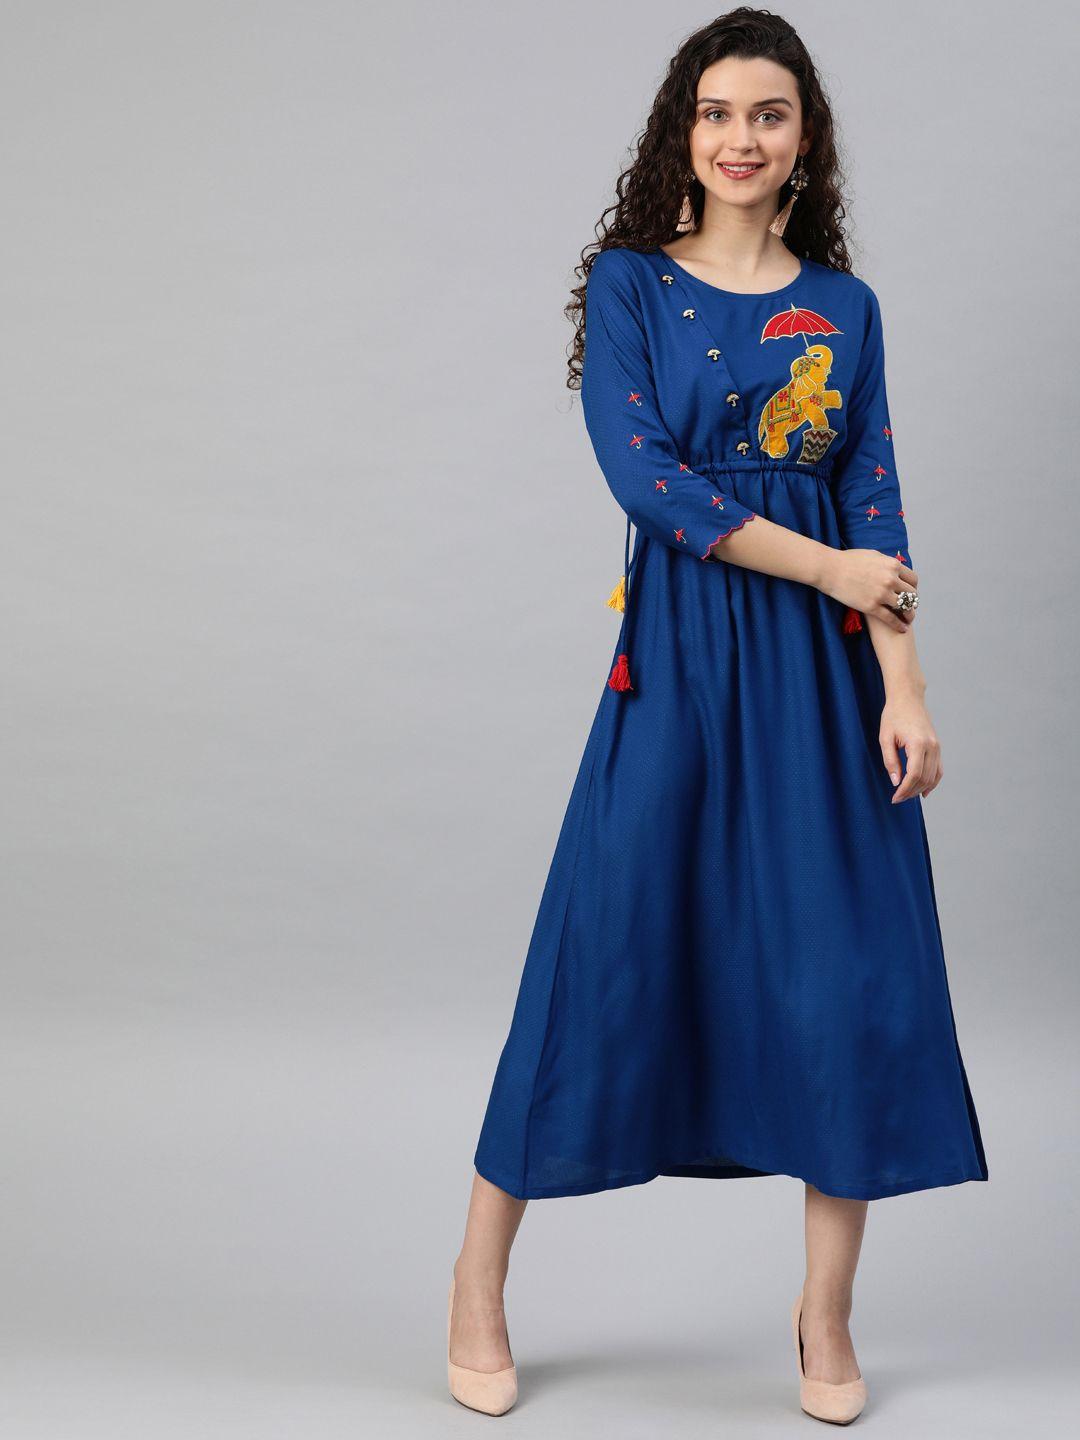 yash gallery women blue embroidered empire dress